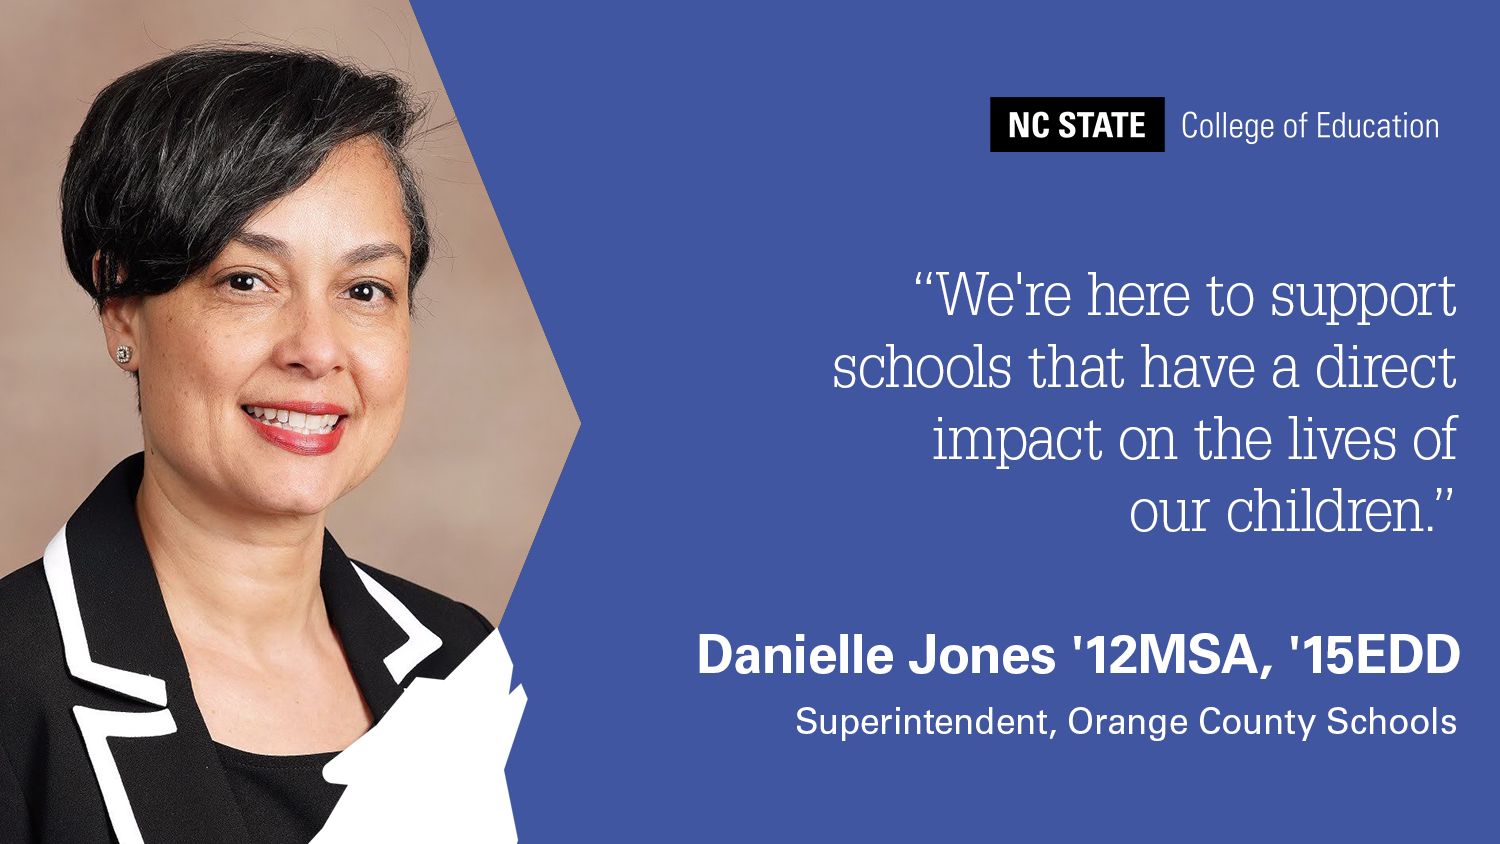 Headshot of Danielle Jones with quote: "We're here to support schools that have a direct impact on the lives of our children."